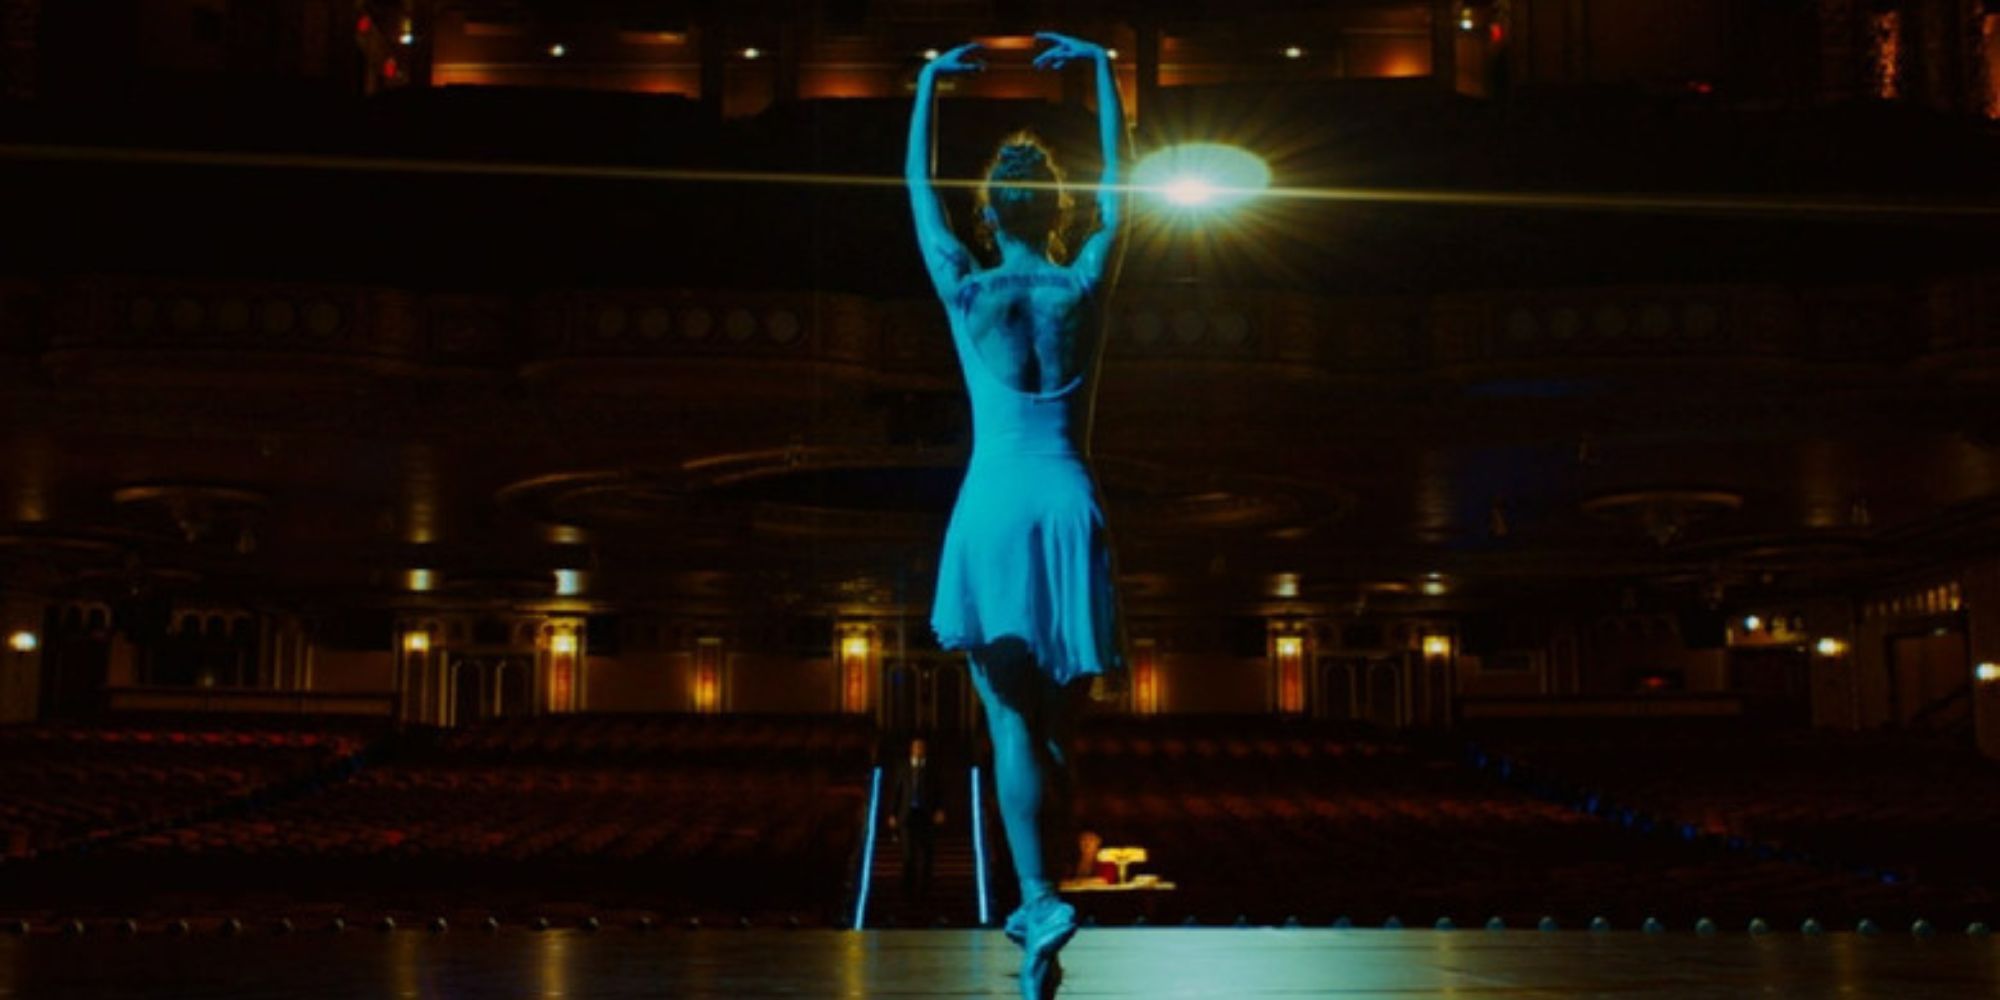 Unity Phelan dances on stage as The Ballerina in John Wick: Chapter 3 - Parabellum.